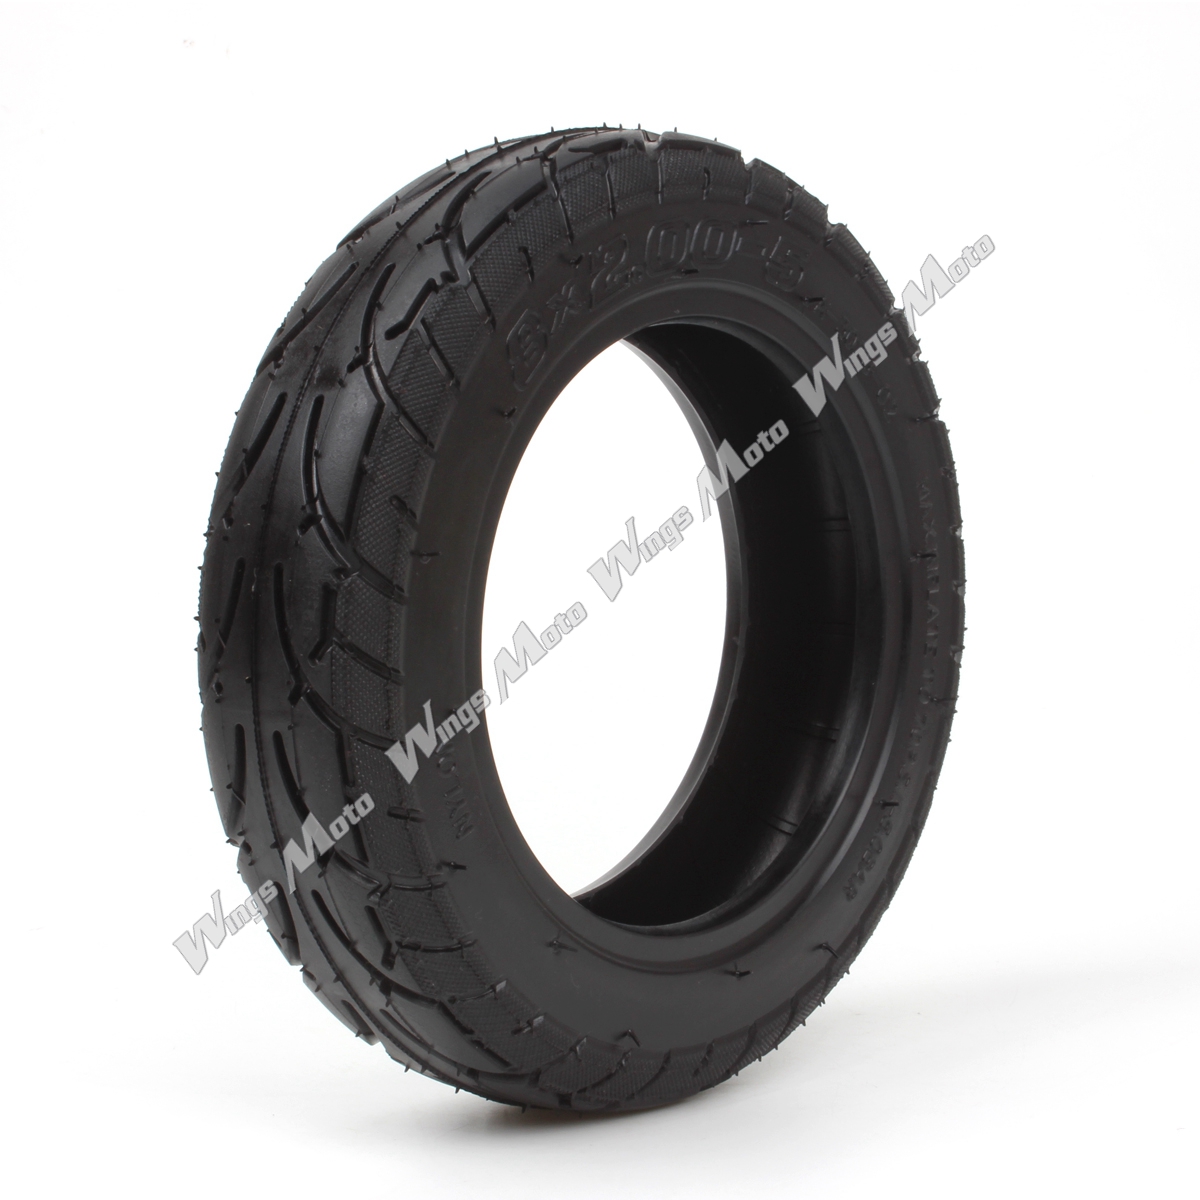 8 x 2.00-5 Tubeless Tire Tyre for Electric Scooter 8 Inch E Scooter Universal Tire